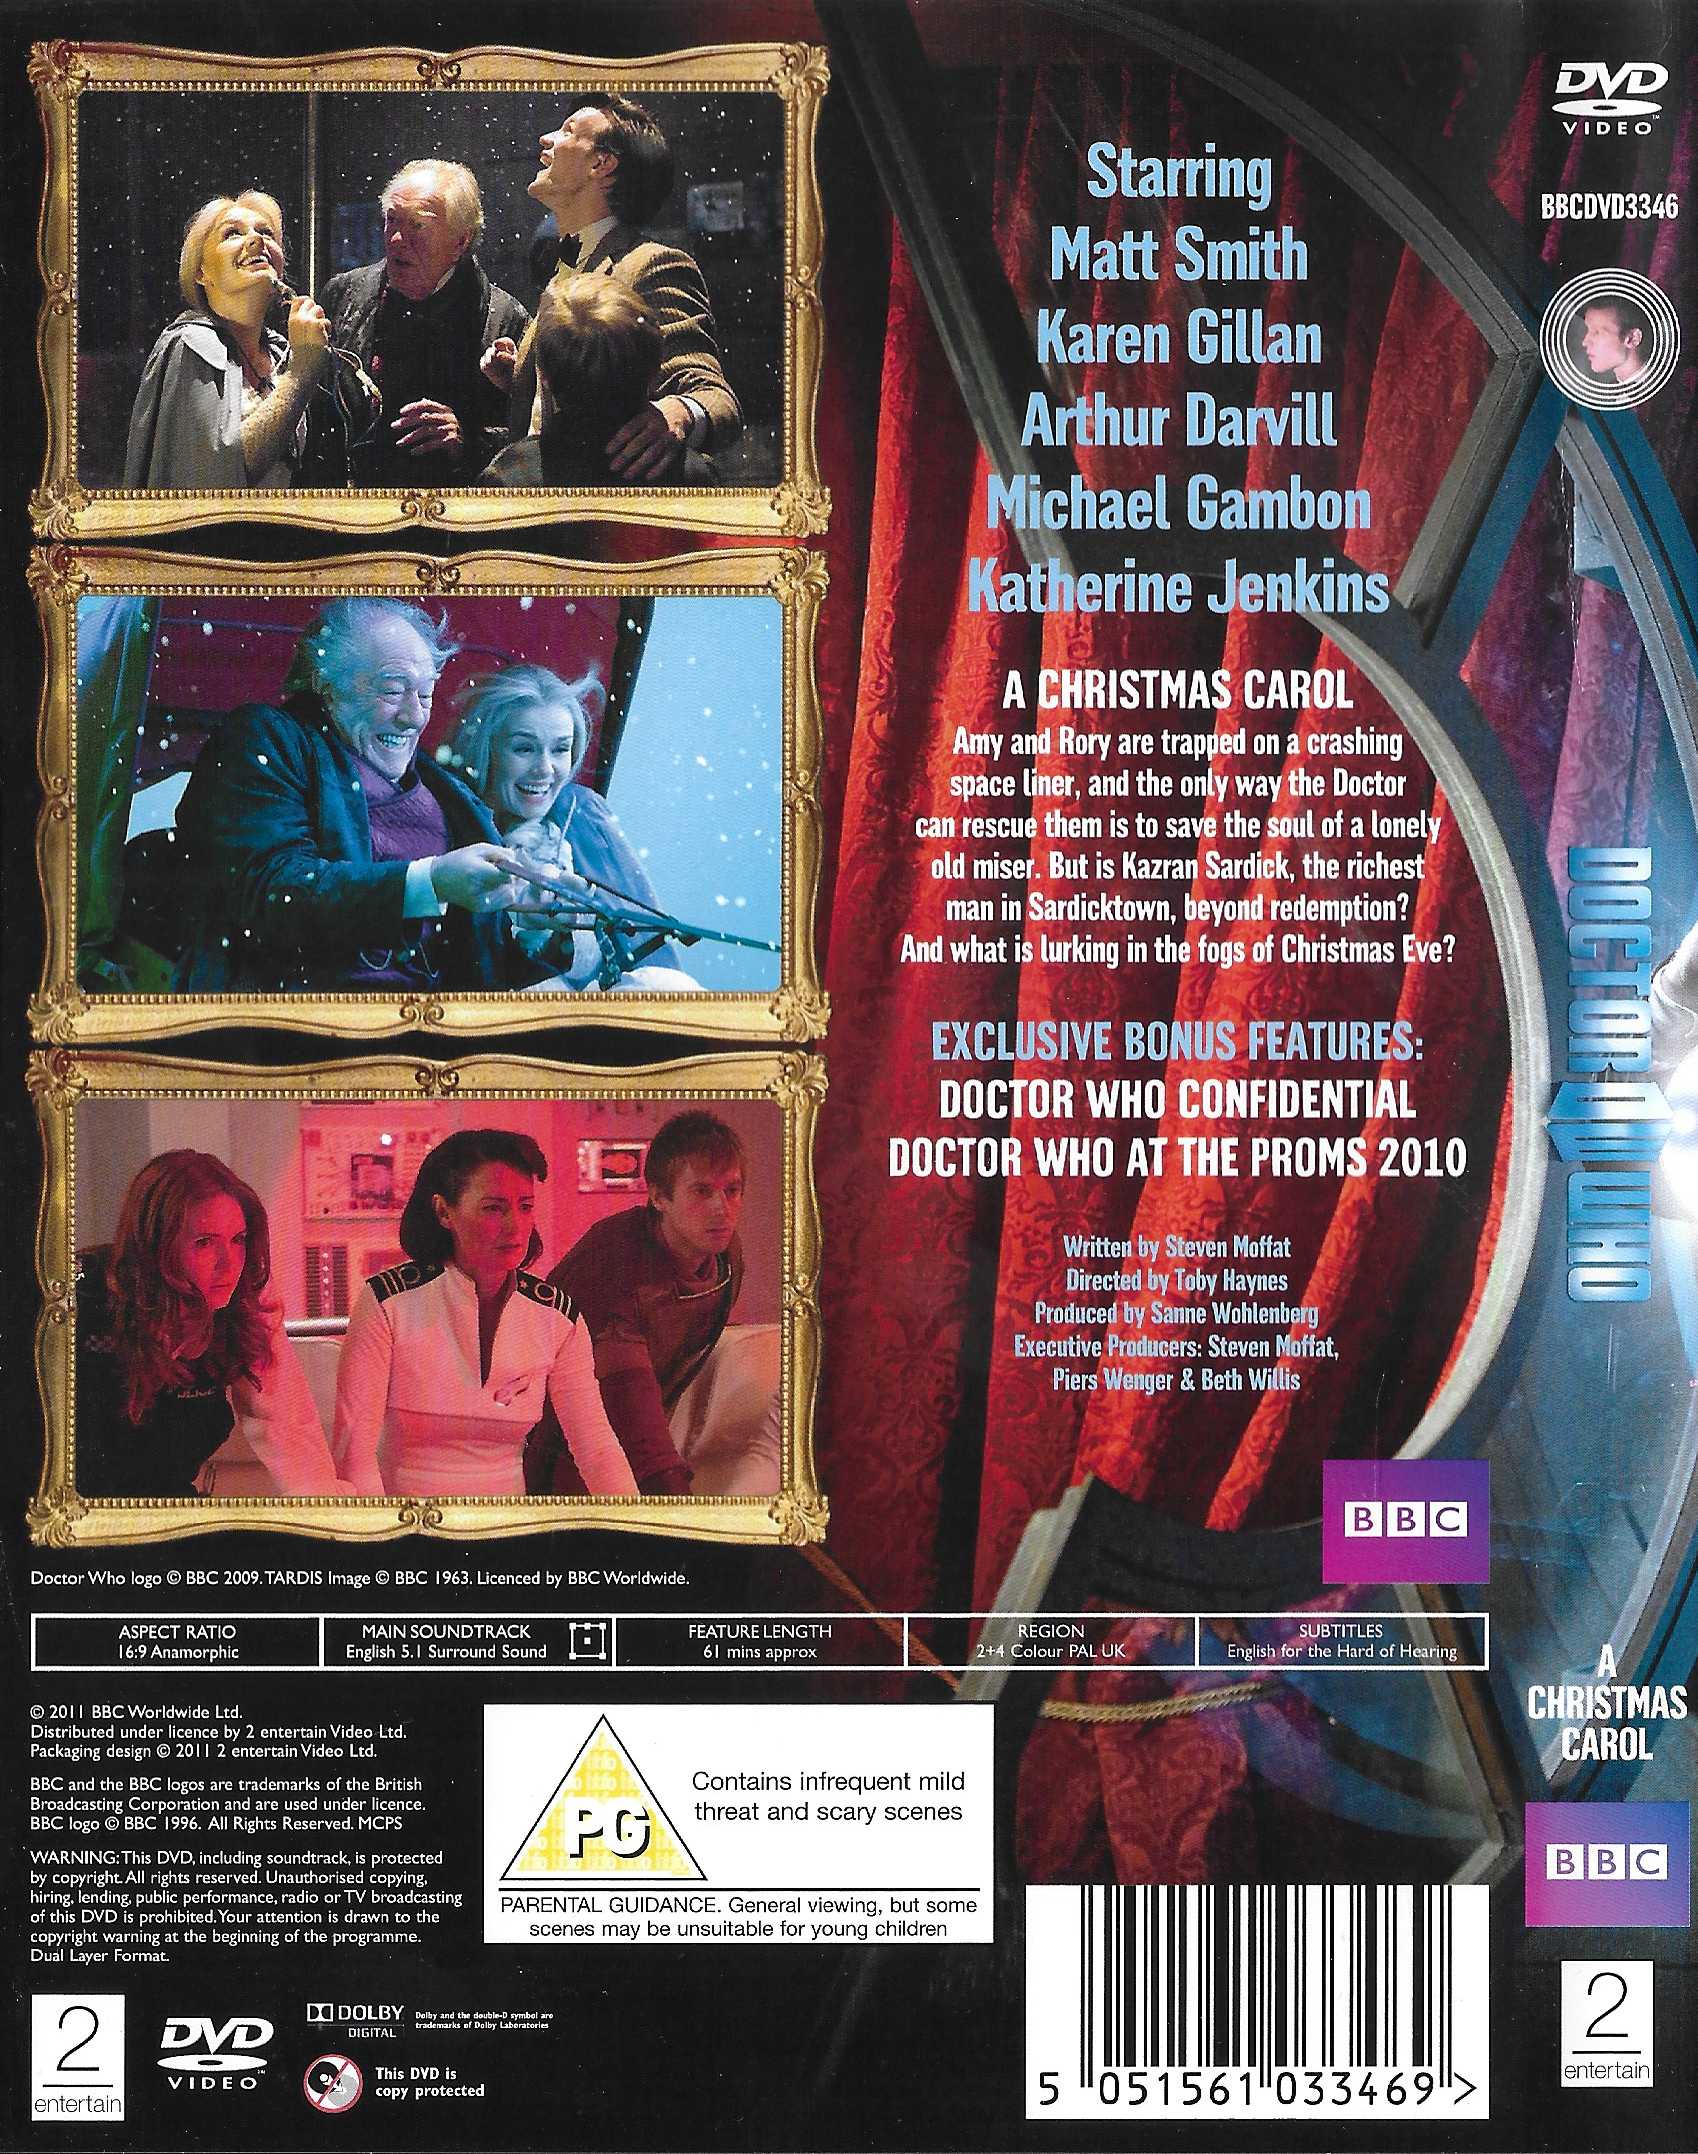 Picture of BBCDVD 3346 Doctor Who - A Christmas carol by artist Steven Moffat from the BBC records and Tapes library